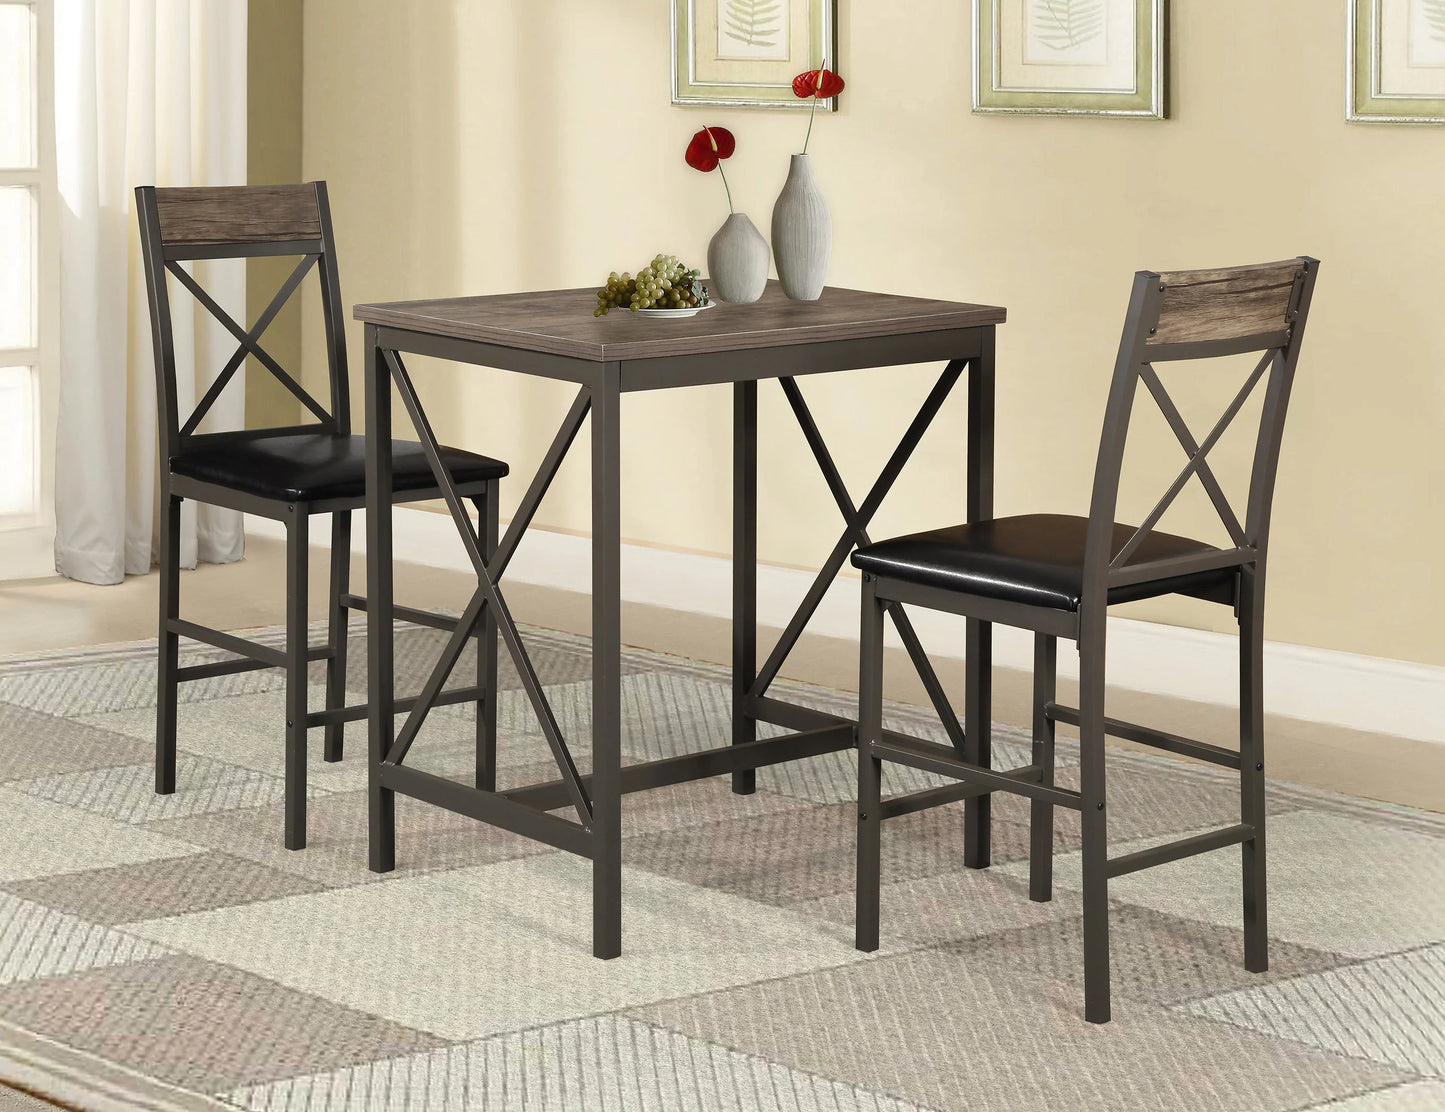 3-PC Pack Counter Height Table Set with 2 Chairs